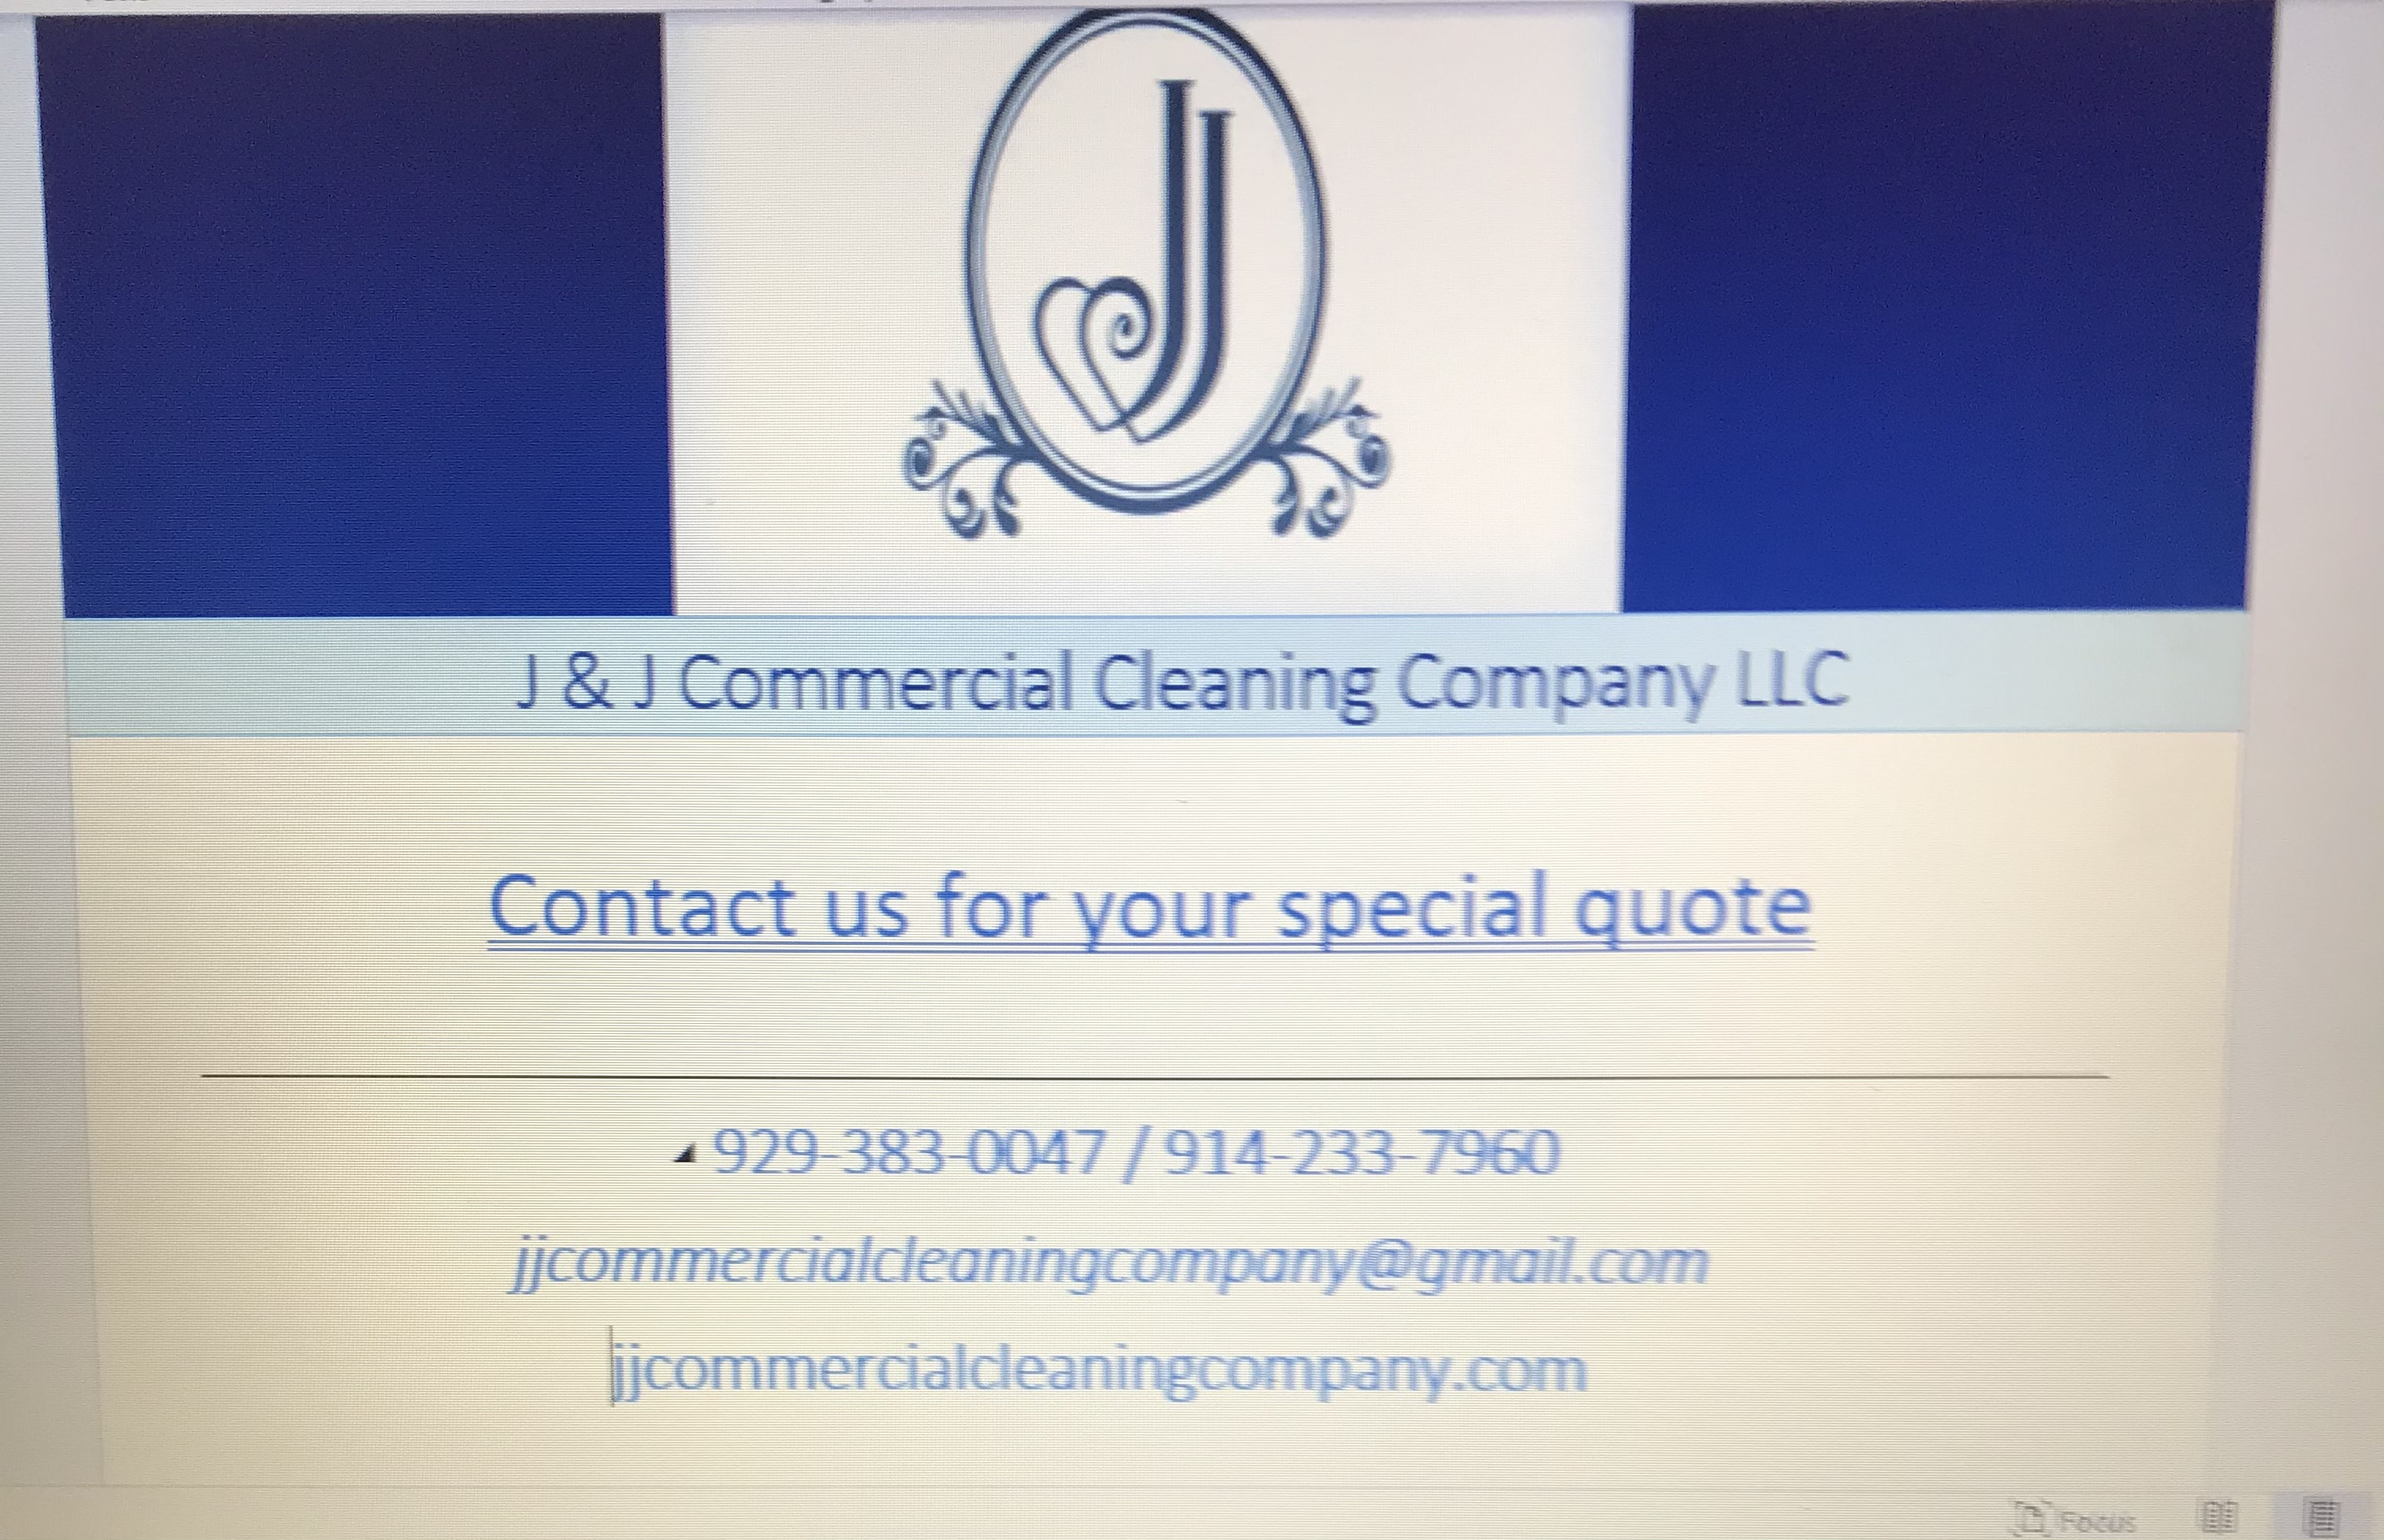 J & J Commercial Cleaning Company Logo